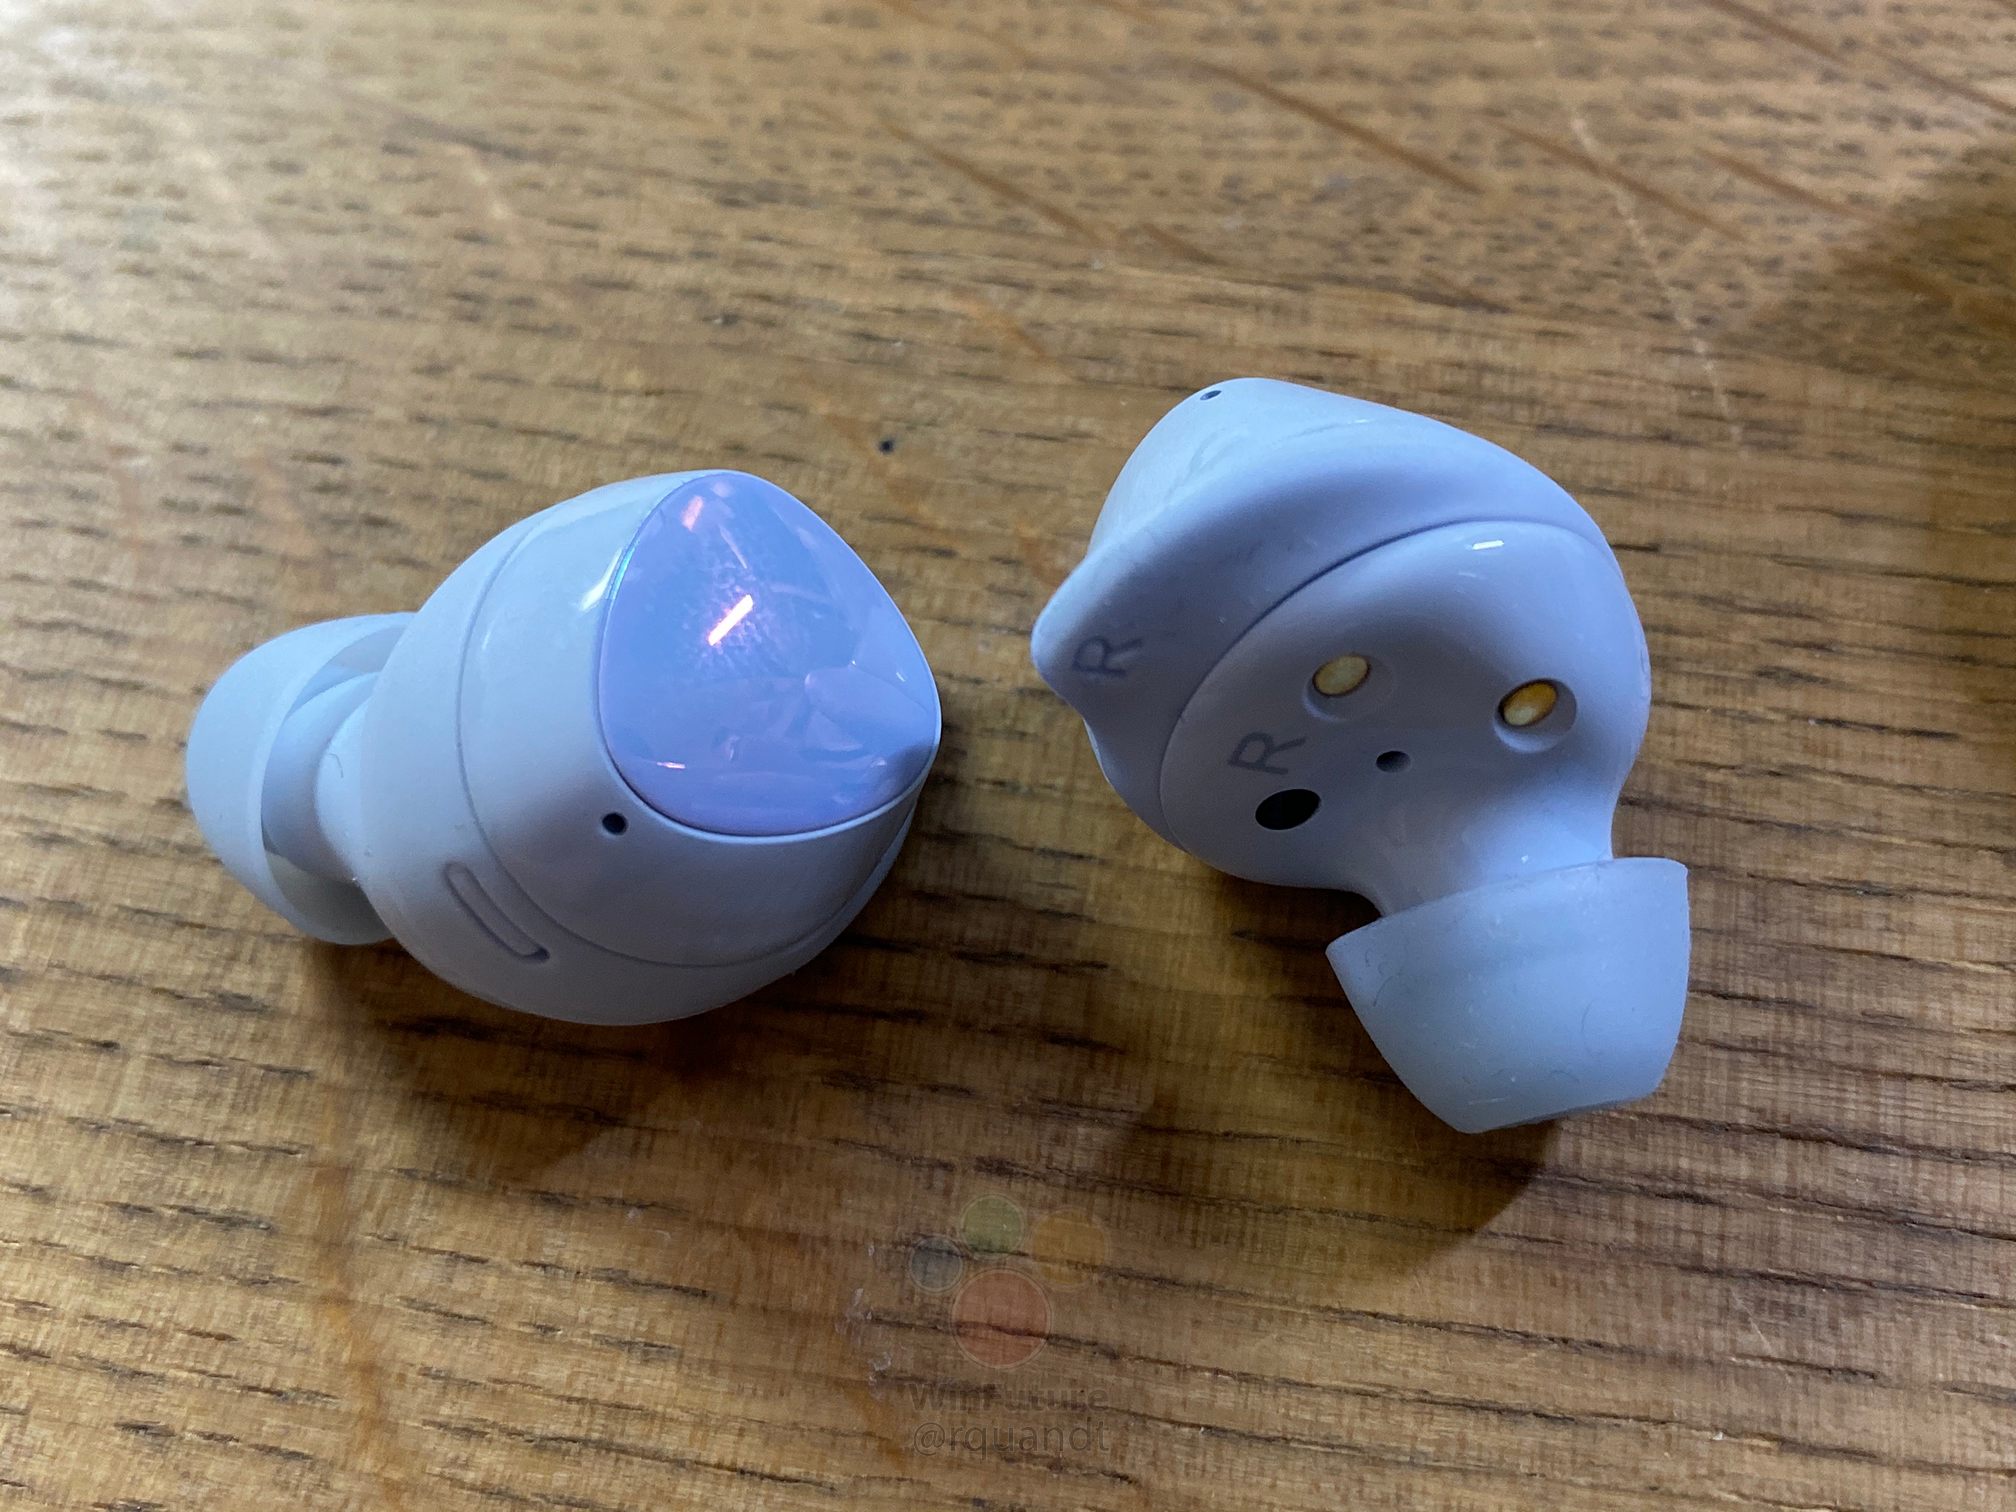 Samsung Galaxy Buds Plus look great in hands-on photos